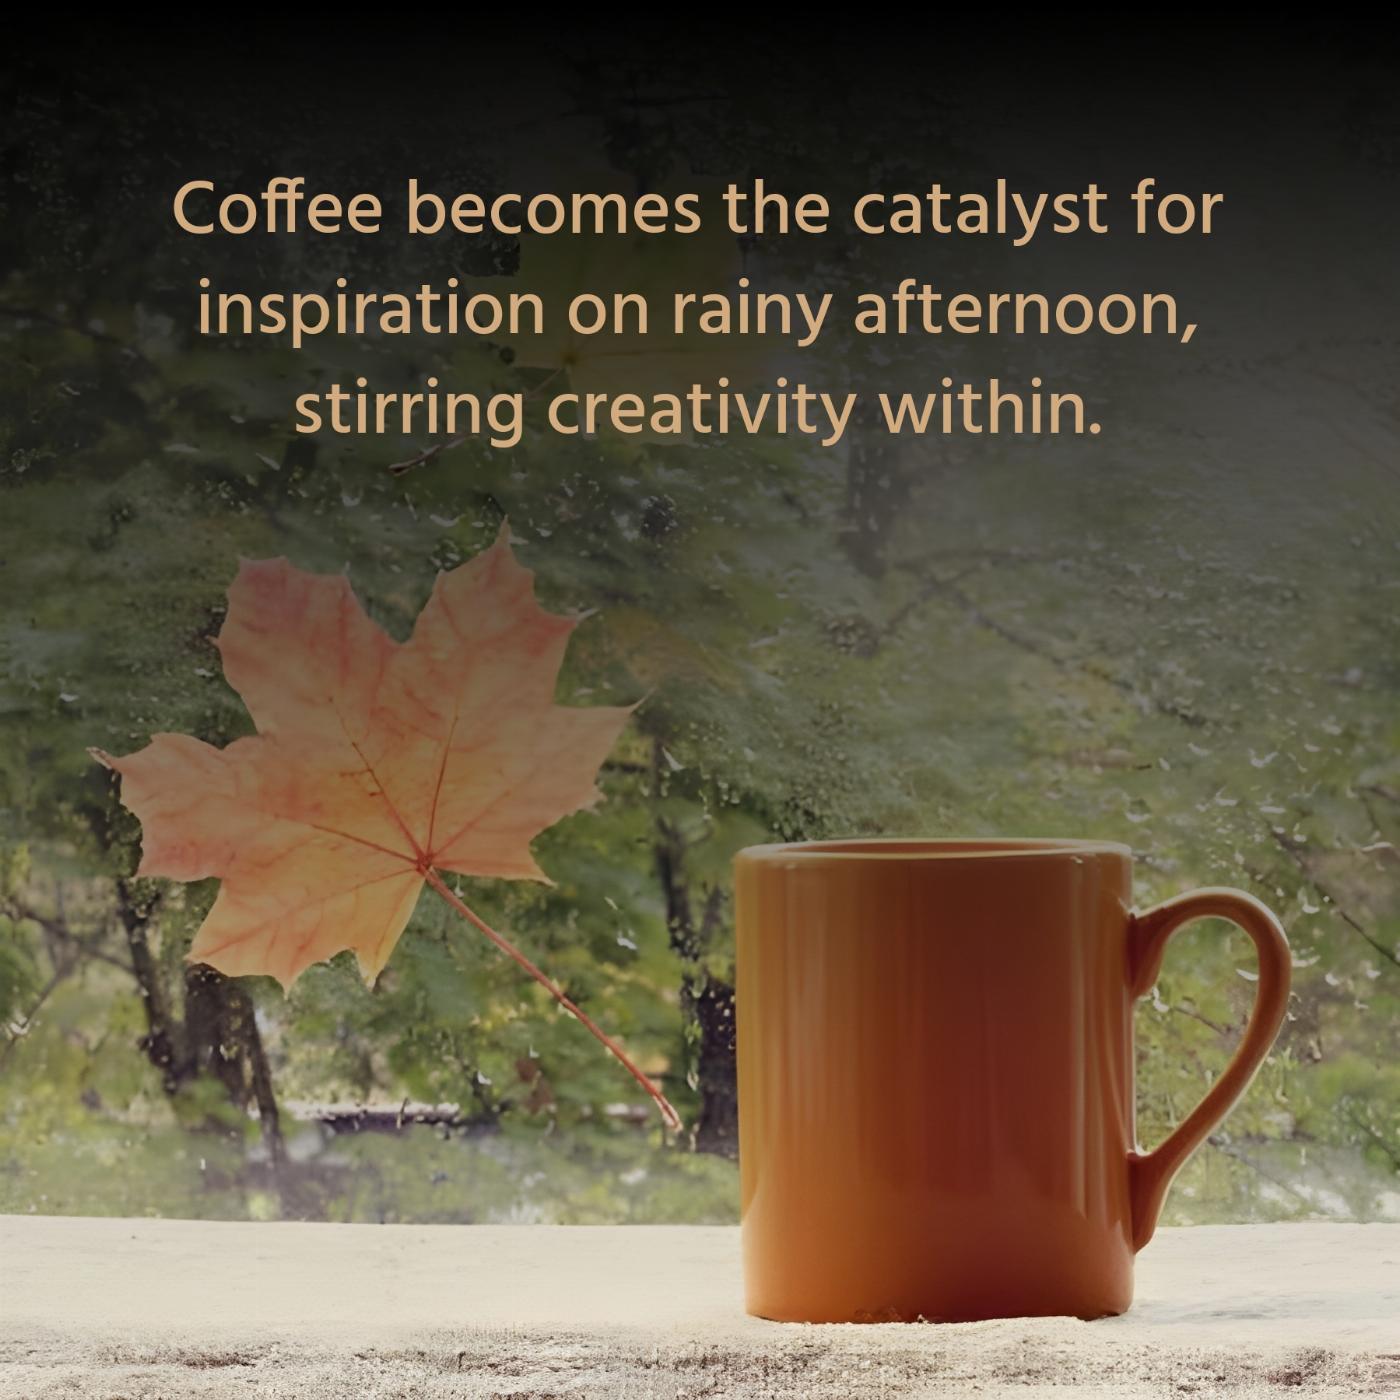 Coffee becomes the catalyst for inspiration on rainy afternoon